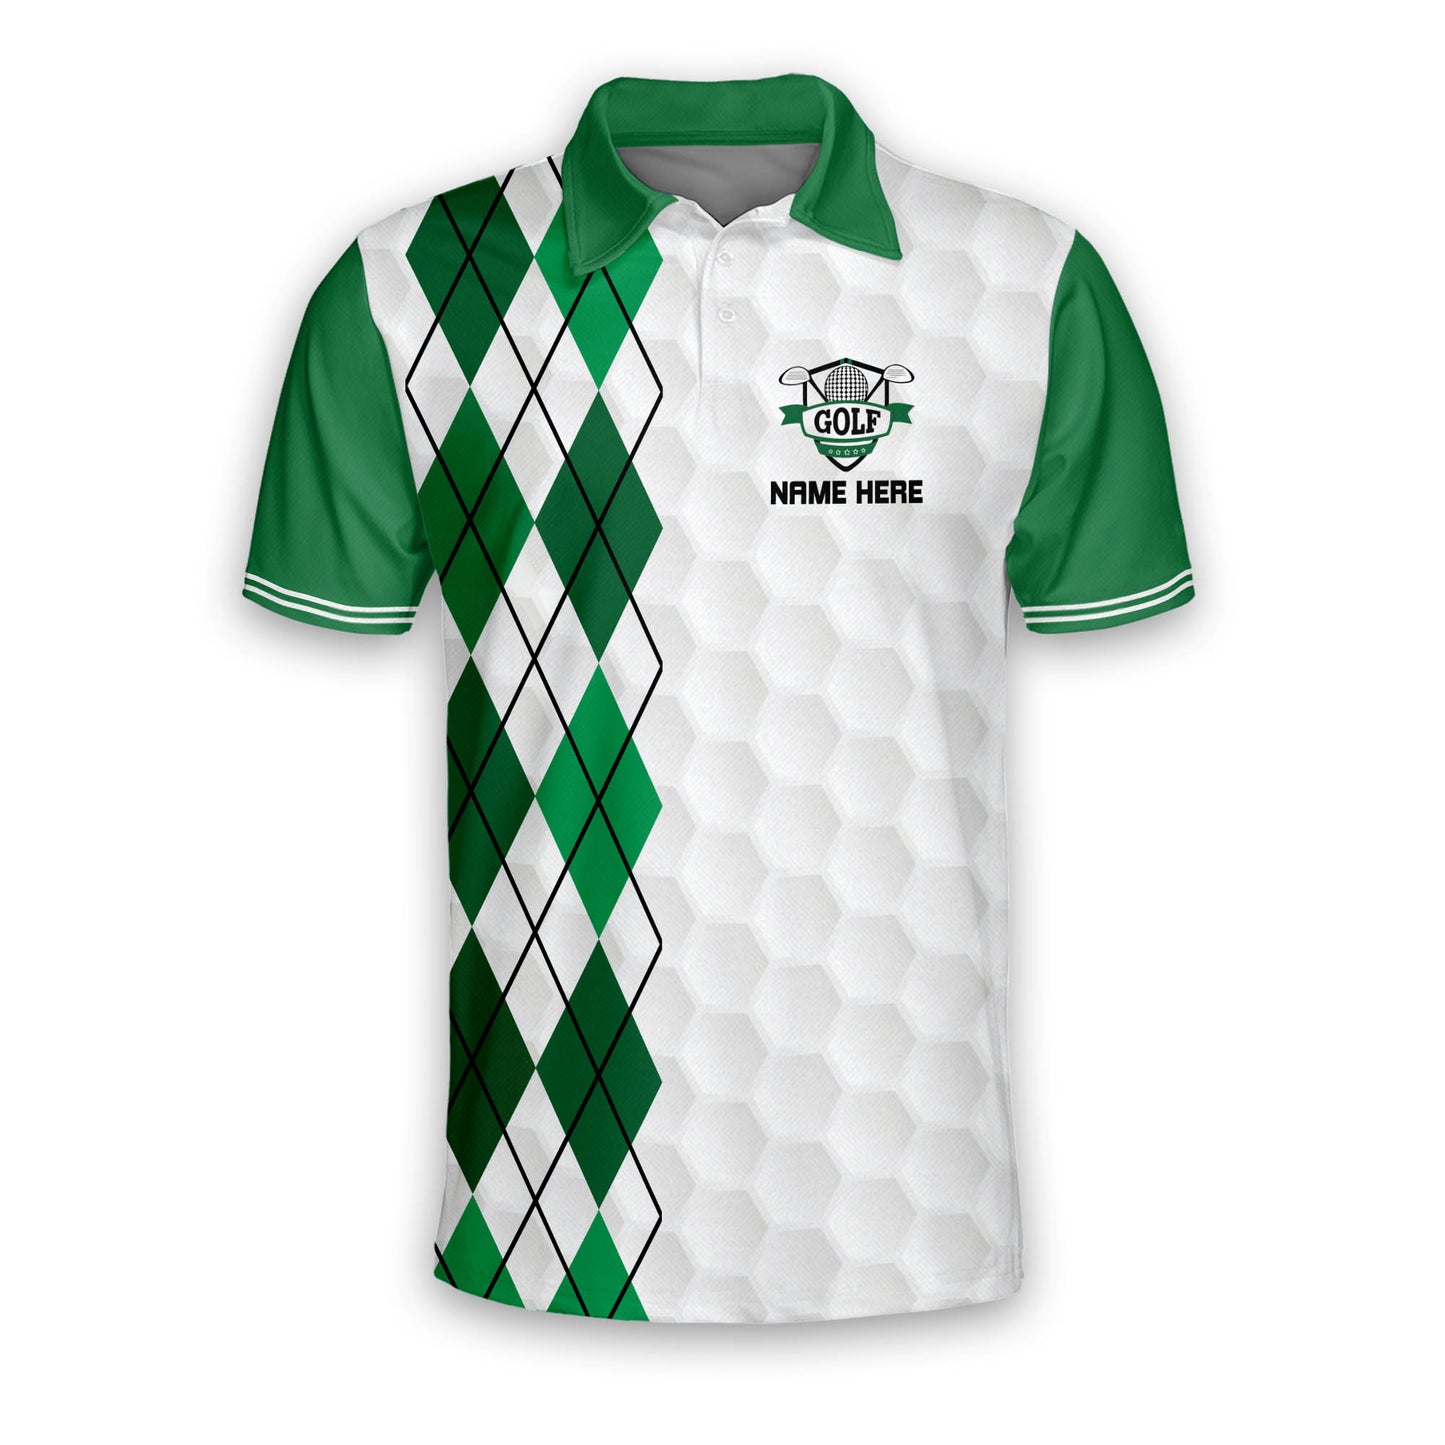 Just Tap It In Crazy Golf Polo Shirt GM0166